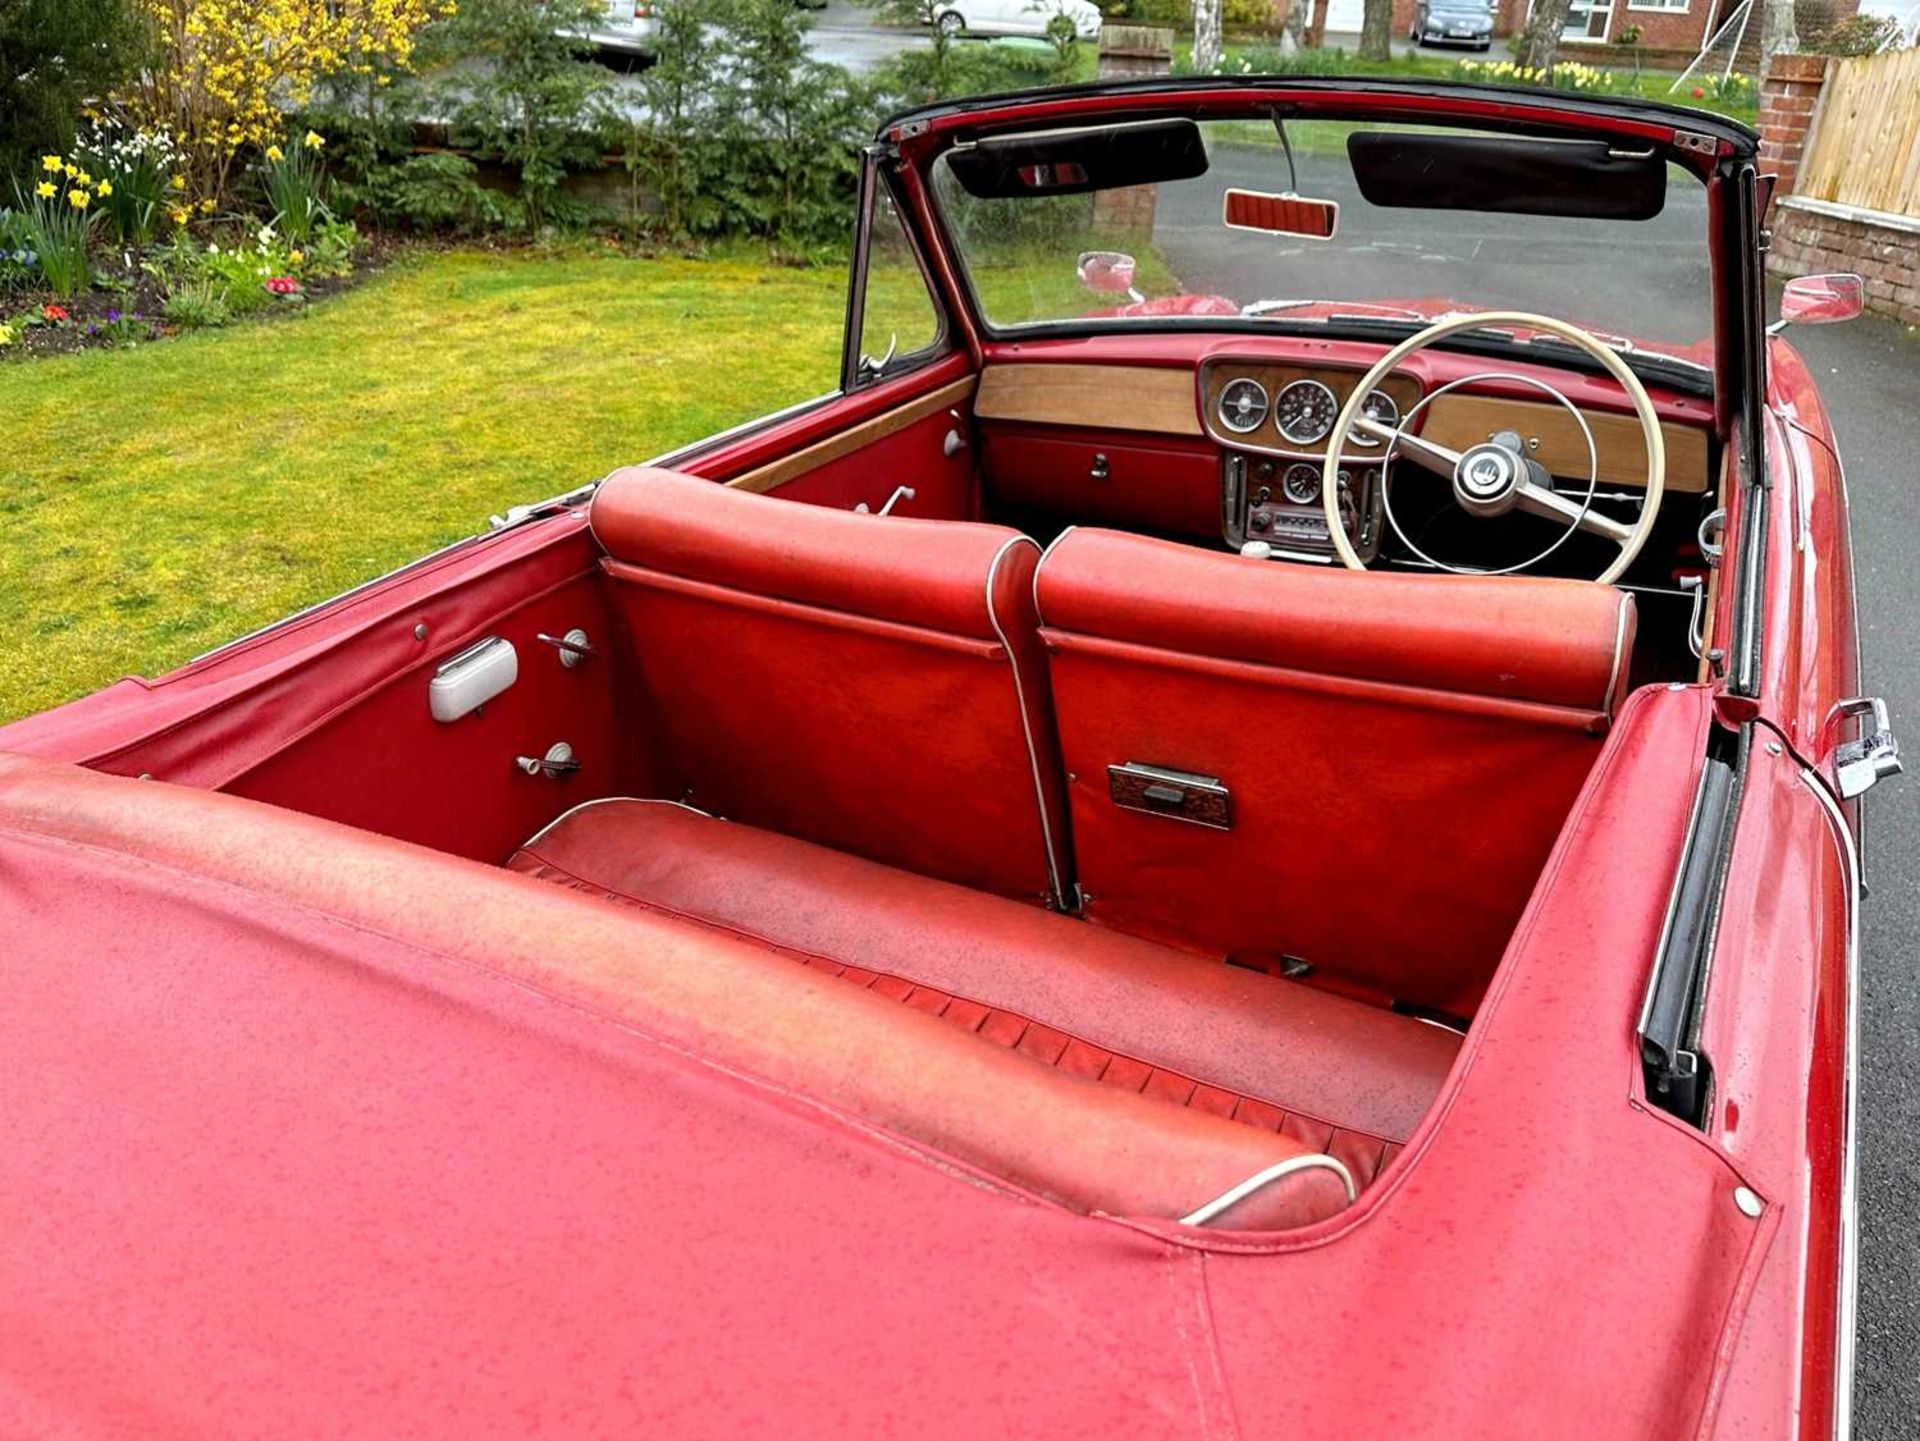 1961 Singer Gazelle Convertible Comes complete with overdrive, period radio and badge bar - Image 41 of 95